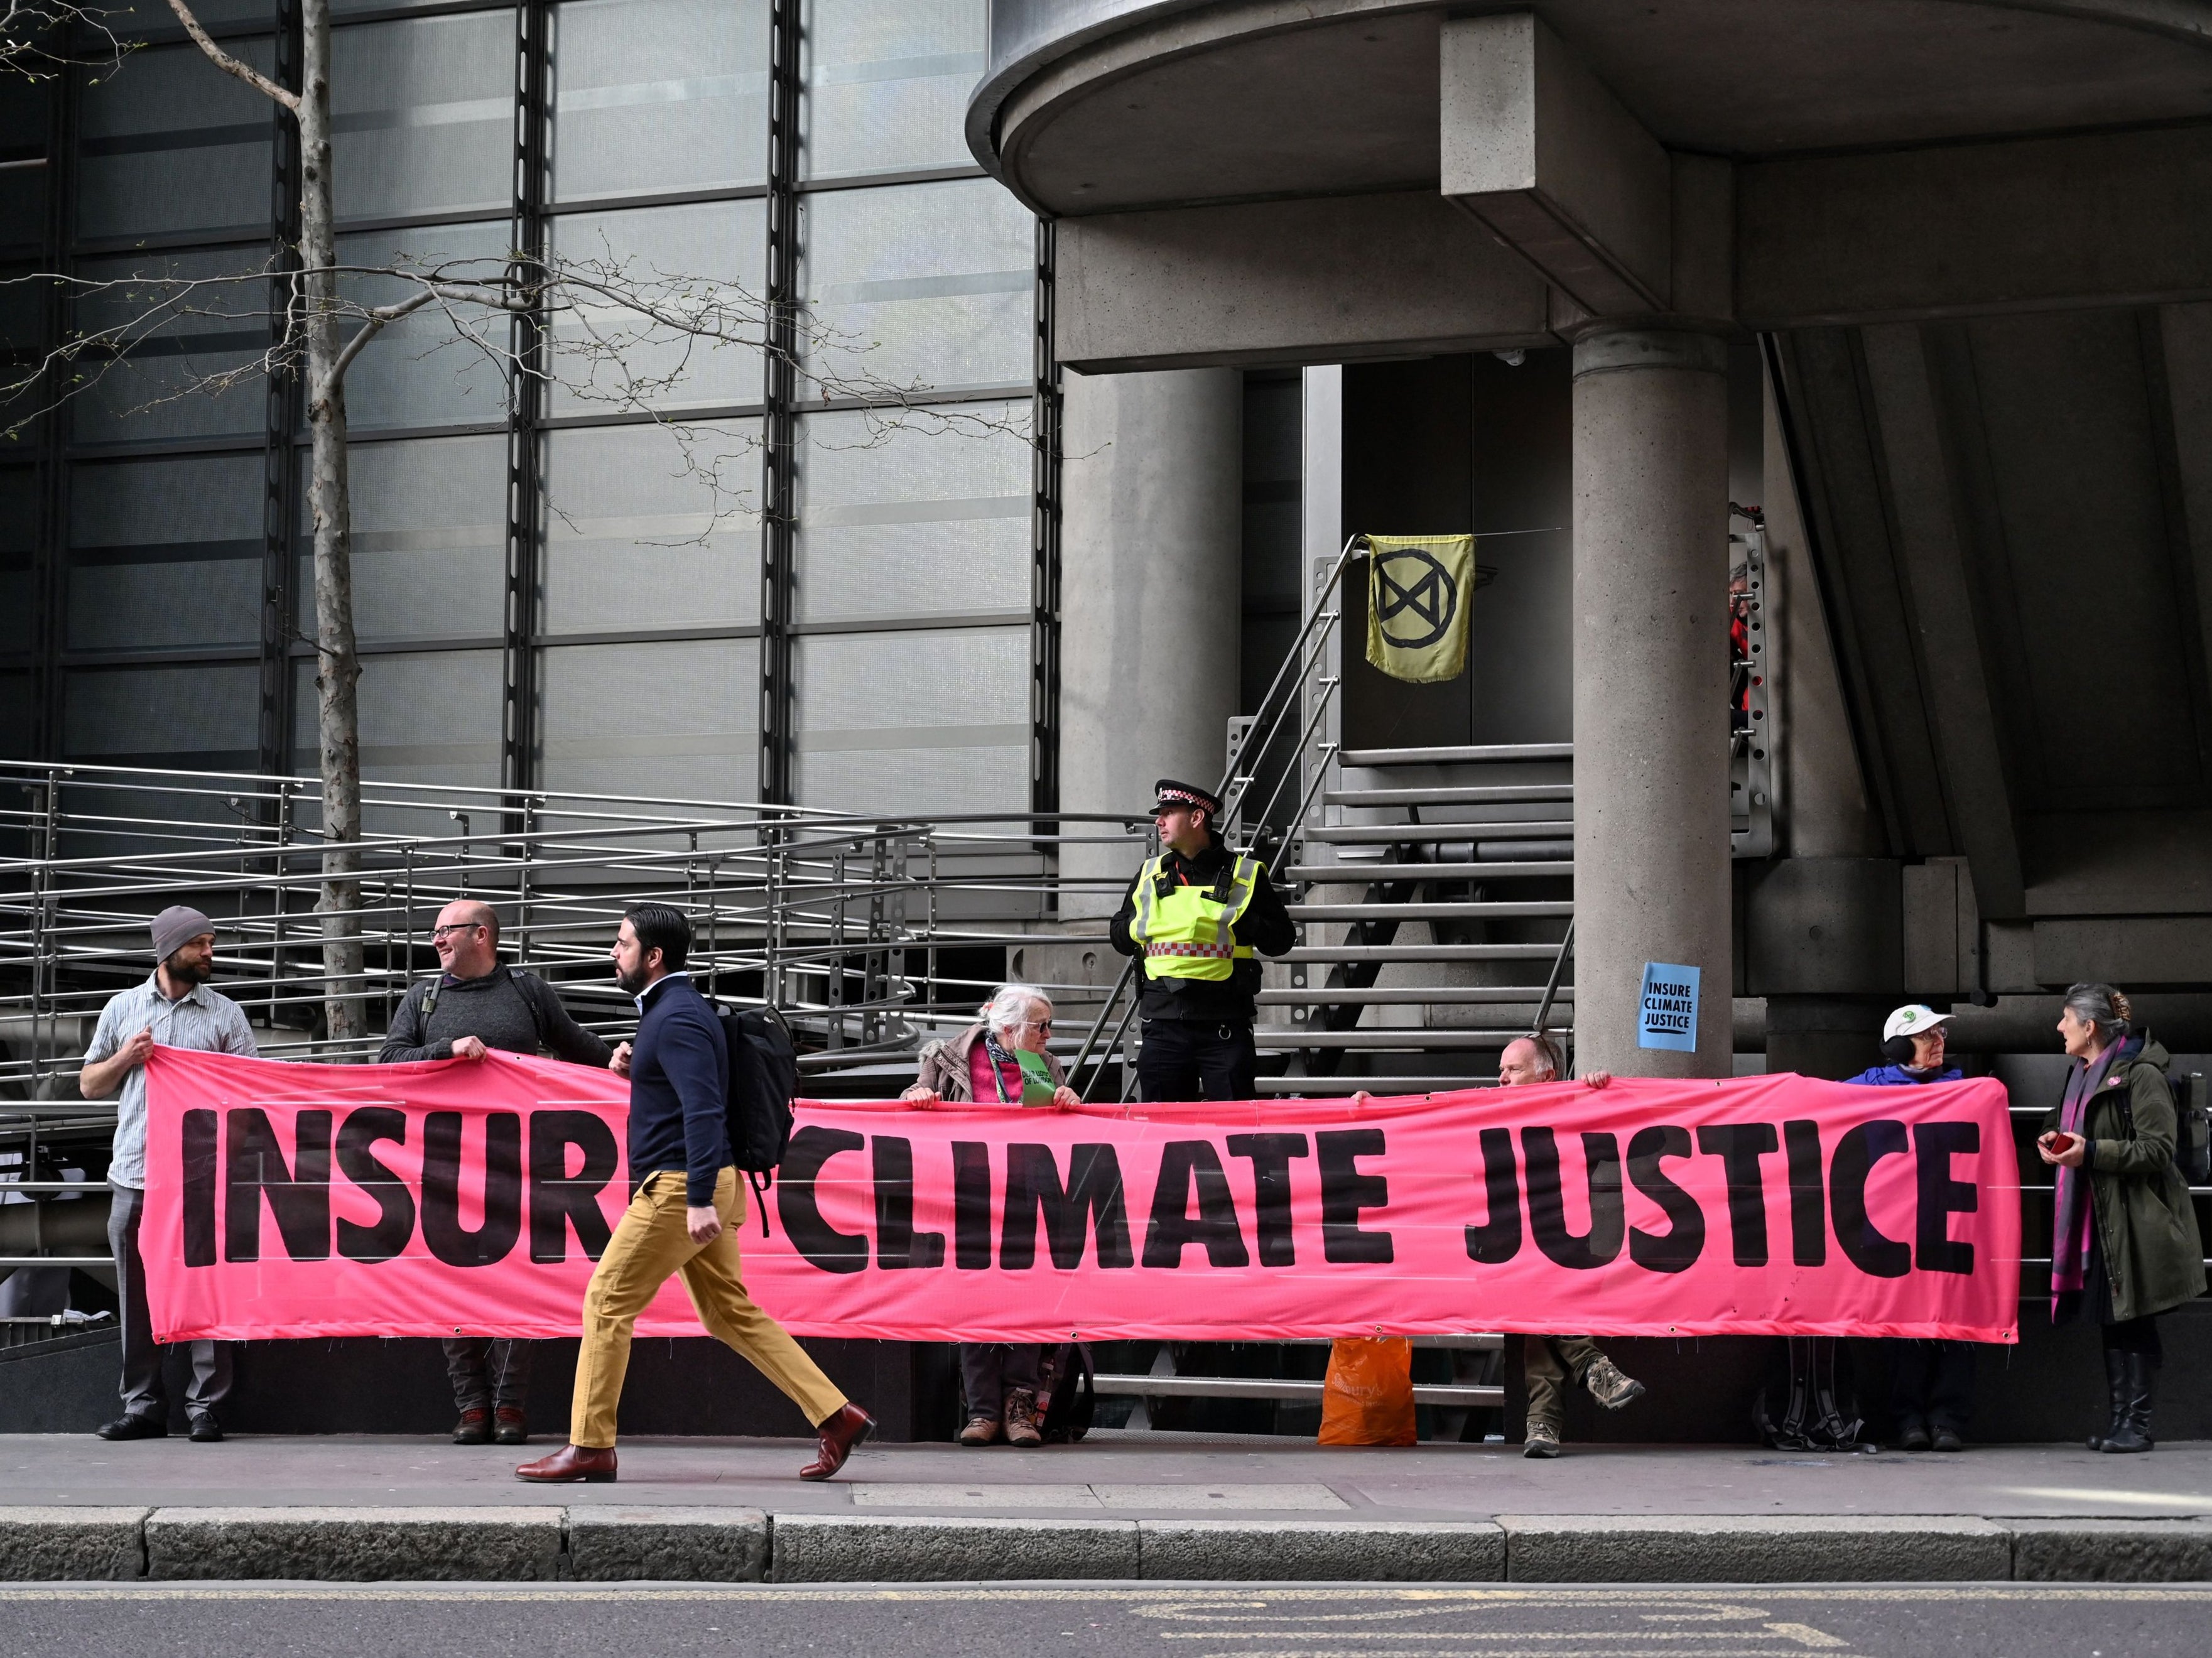 Groups such as Extinction Rebellion have put pressure on financial institutions